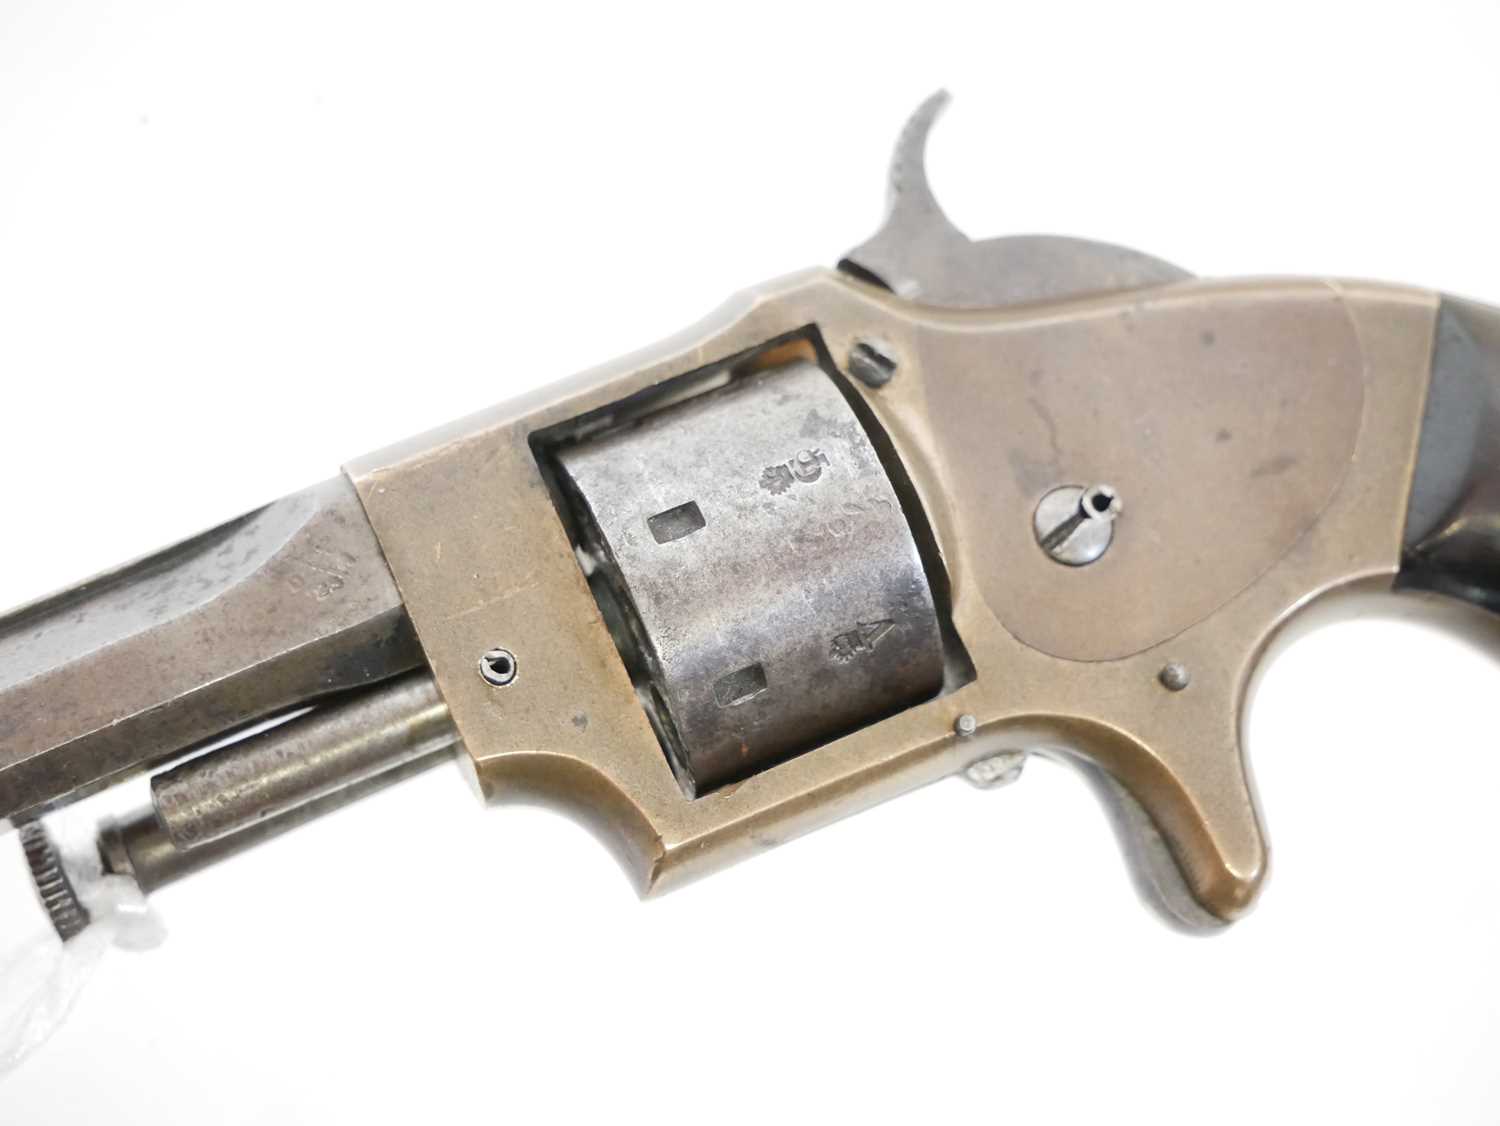 Deactivated Smith and Wesson .22 rimfire revolver - Image 5 of 7